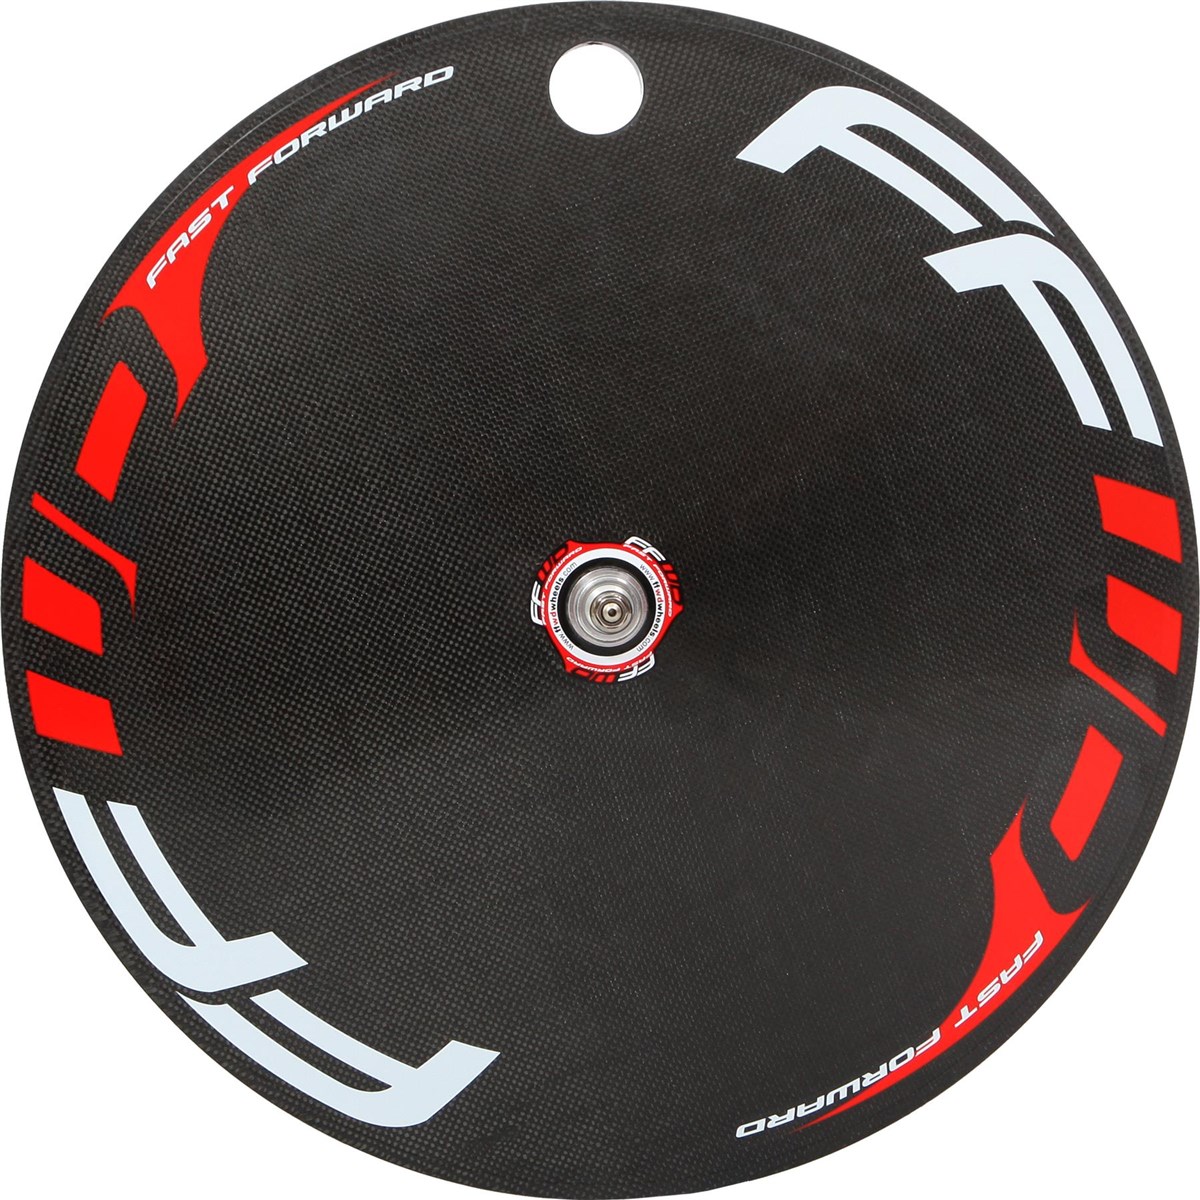 Fast Forward Disc Carbon Alloy Clincher Wheels product image